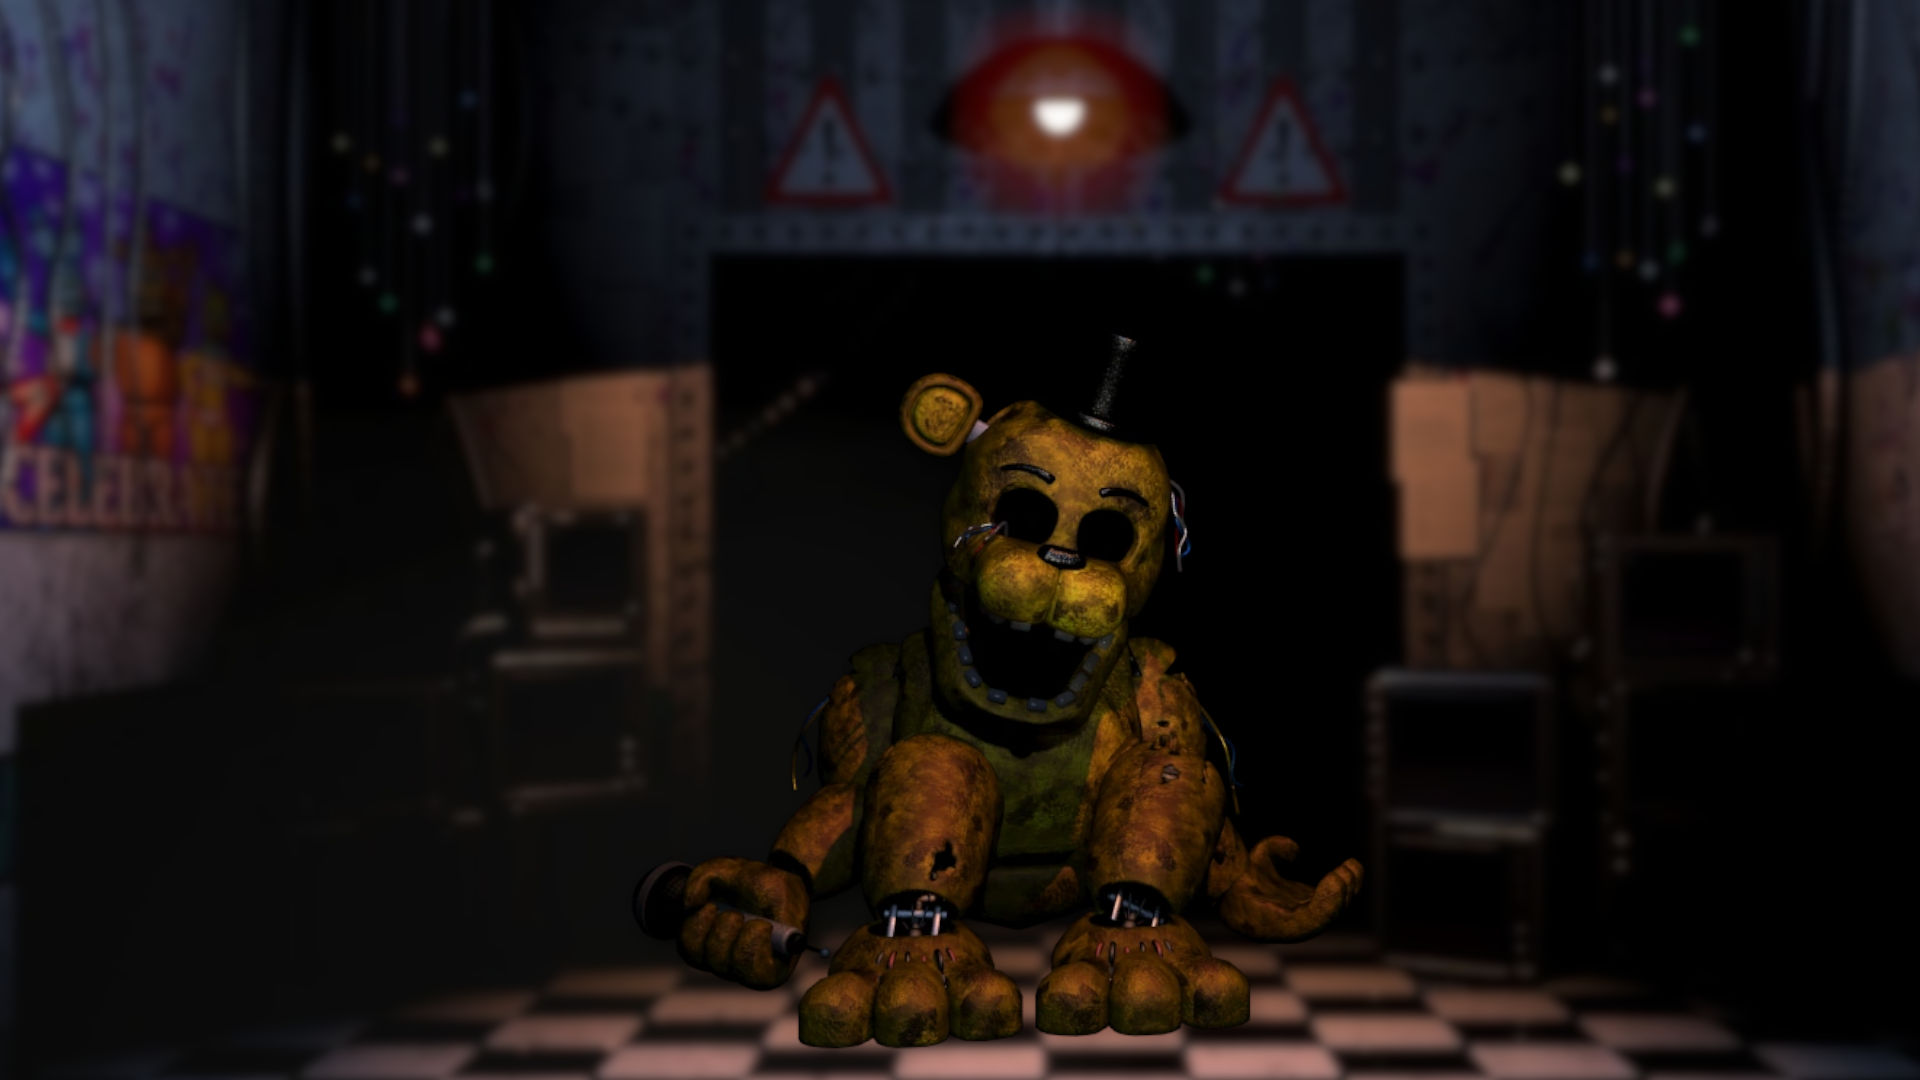 FNAF Freddy – versions, personality, and more